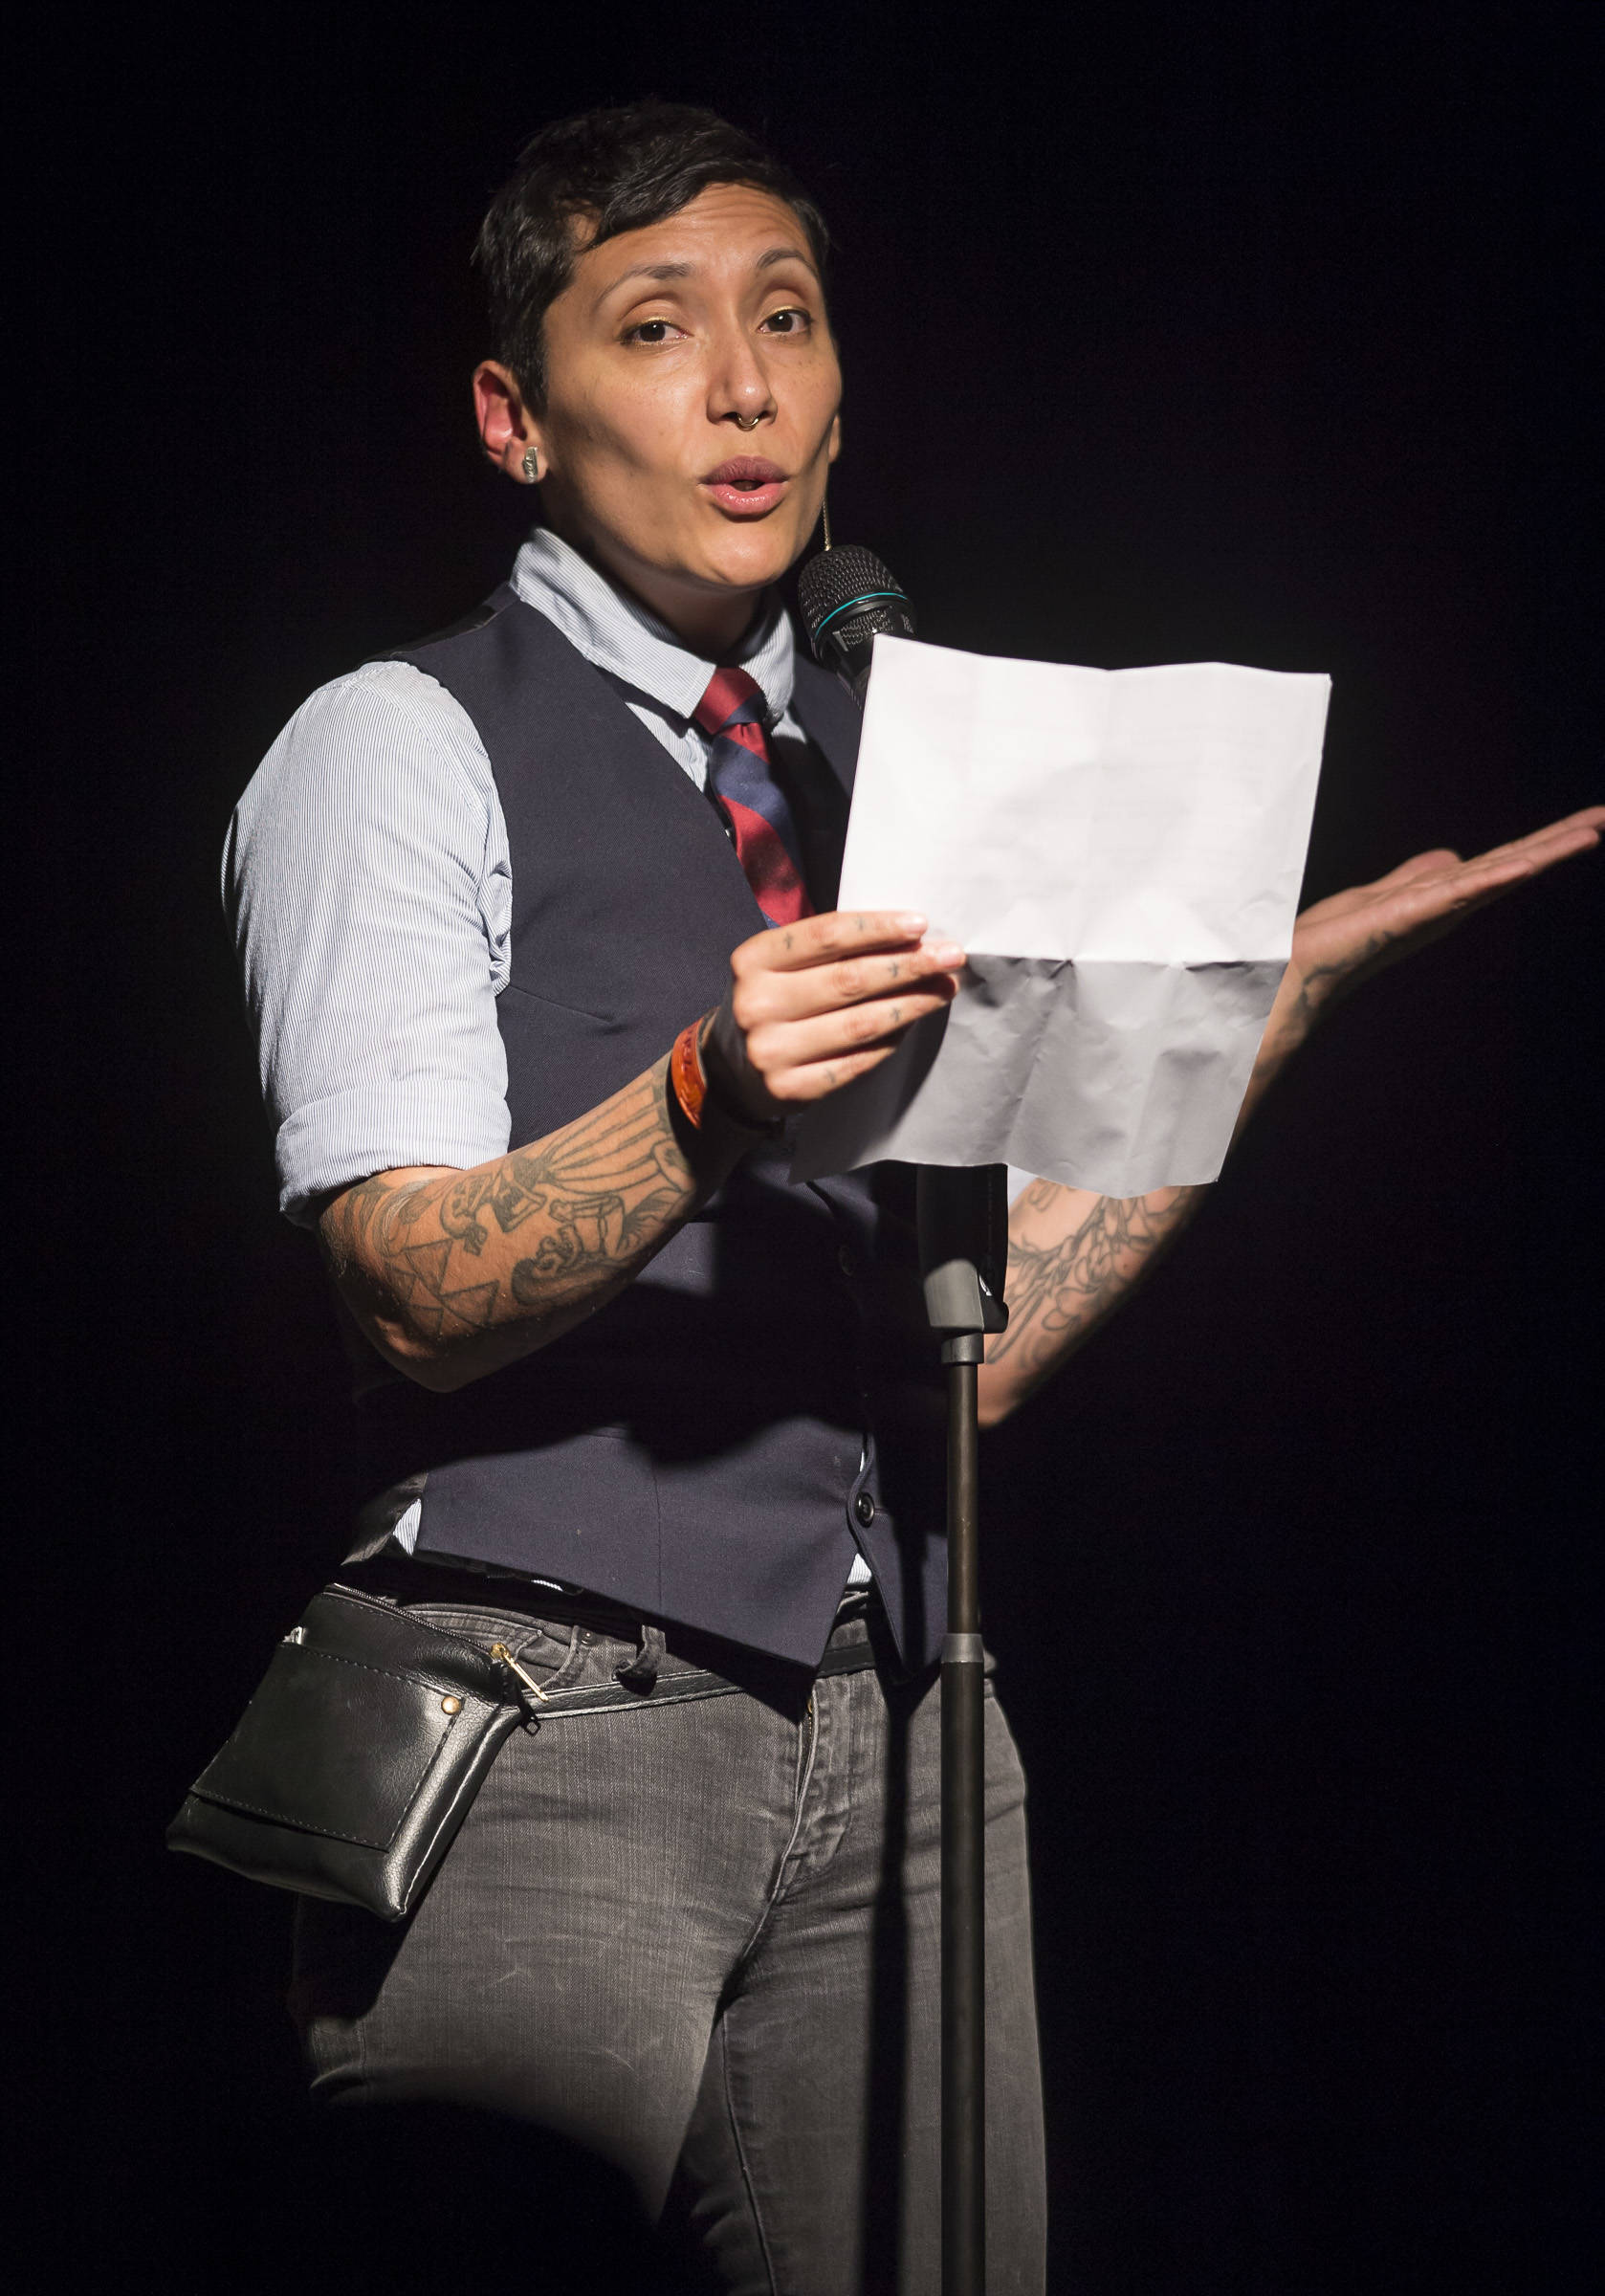 Fabian Romero performs at “You Don’t Have To Go Home, But You Can’t Stay Here” at the Elizabeth Peratrovich Hall on Monday, Sept. 24, 2018. (Michael Penn | Juneau Empire)